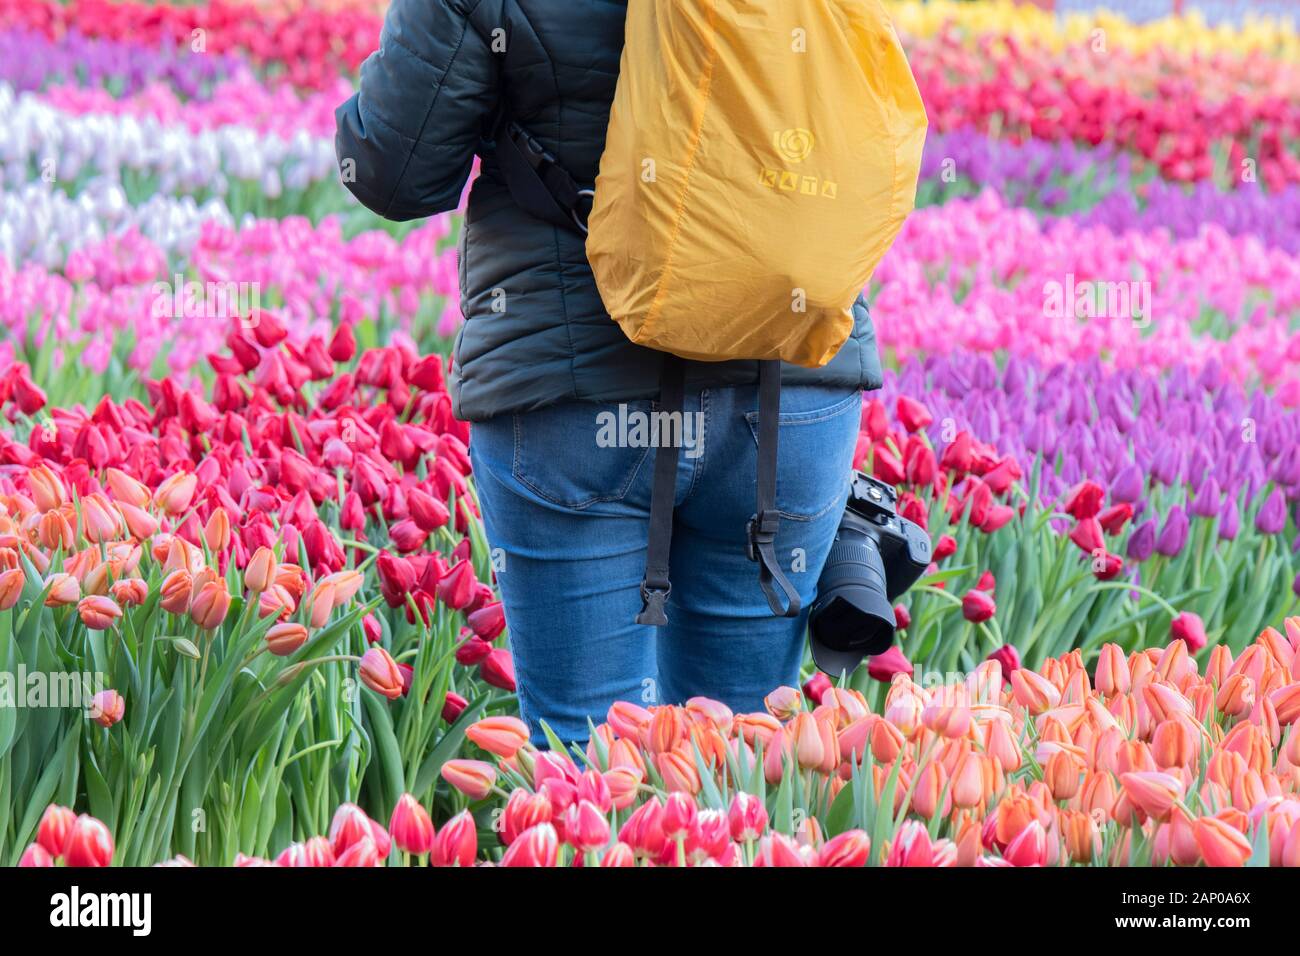 Photographer At The Dam Square At For The National Tulip Day At Amsterdam The Netherlands 2020 Stock Photo